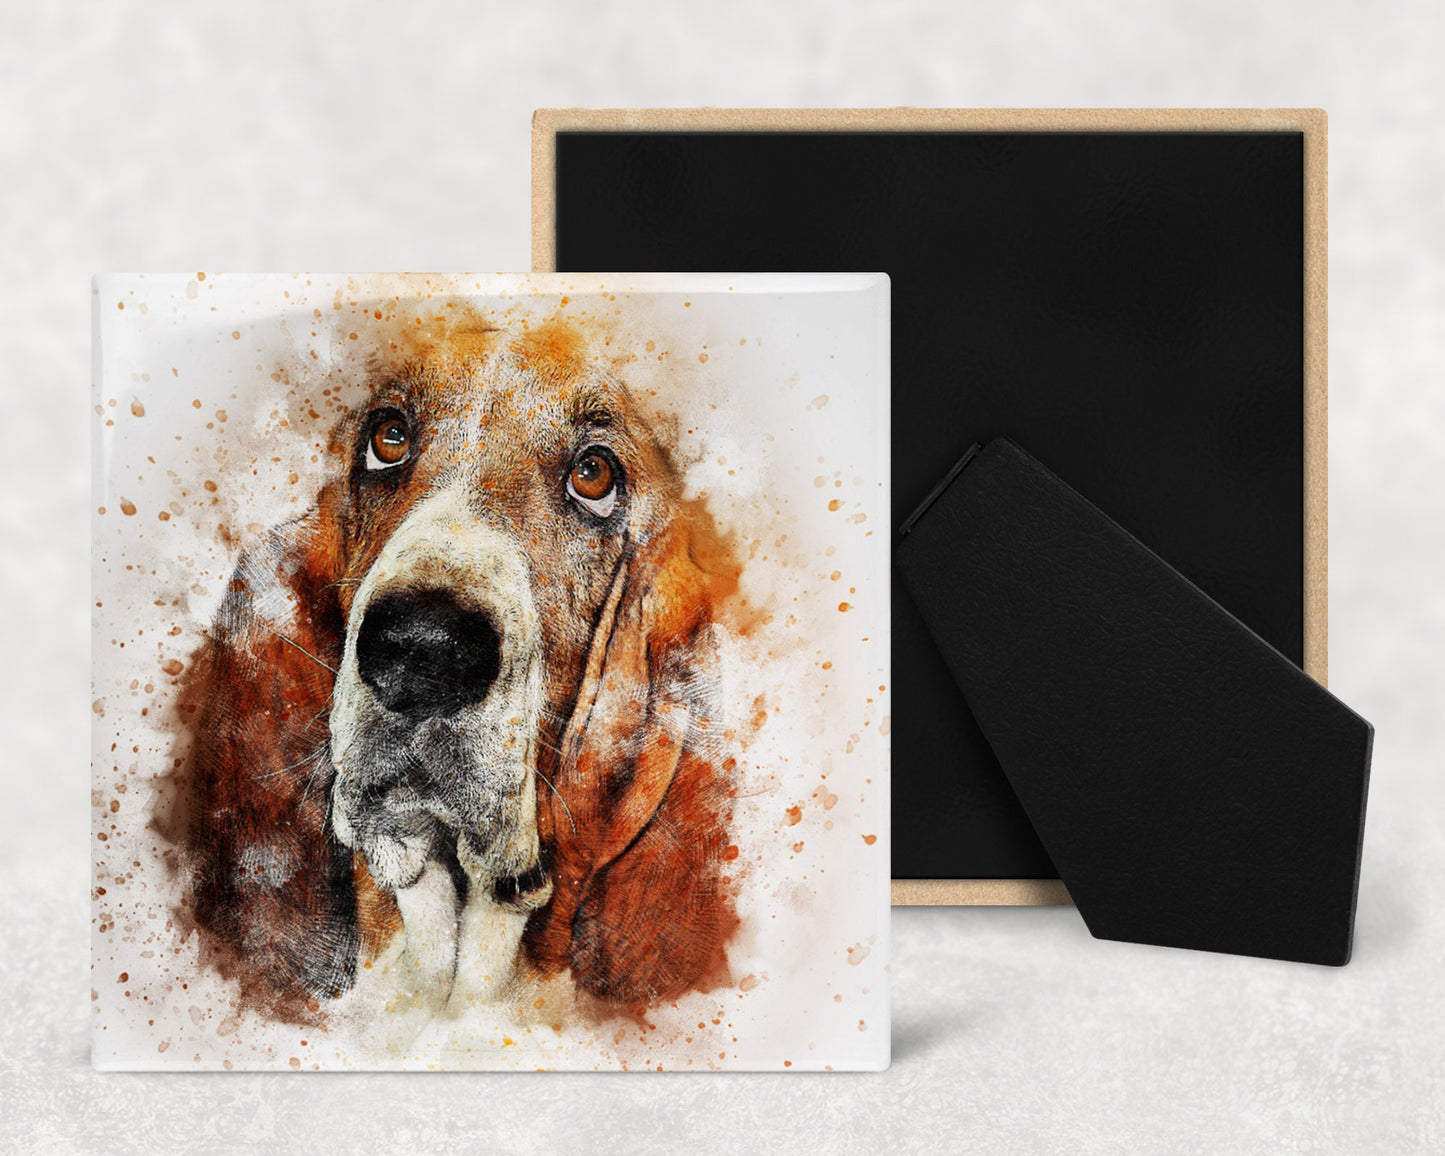 Basset Hound Art Decorative Ceramic Tile with Optional Easel Back - Available in 3 Sizes